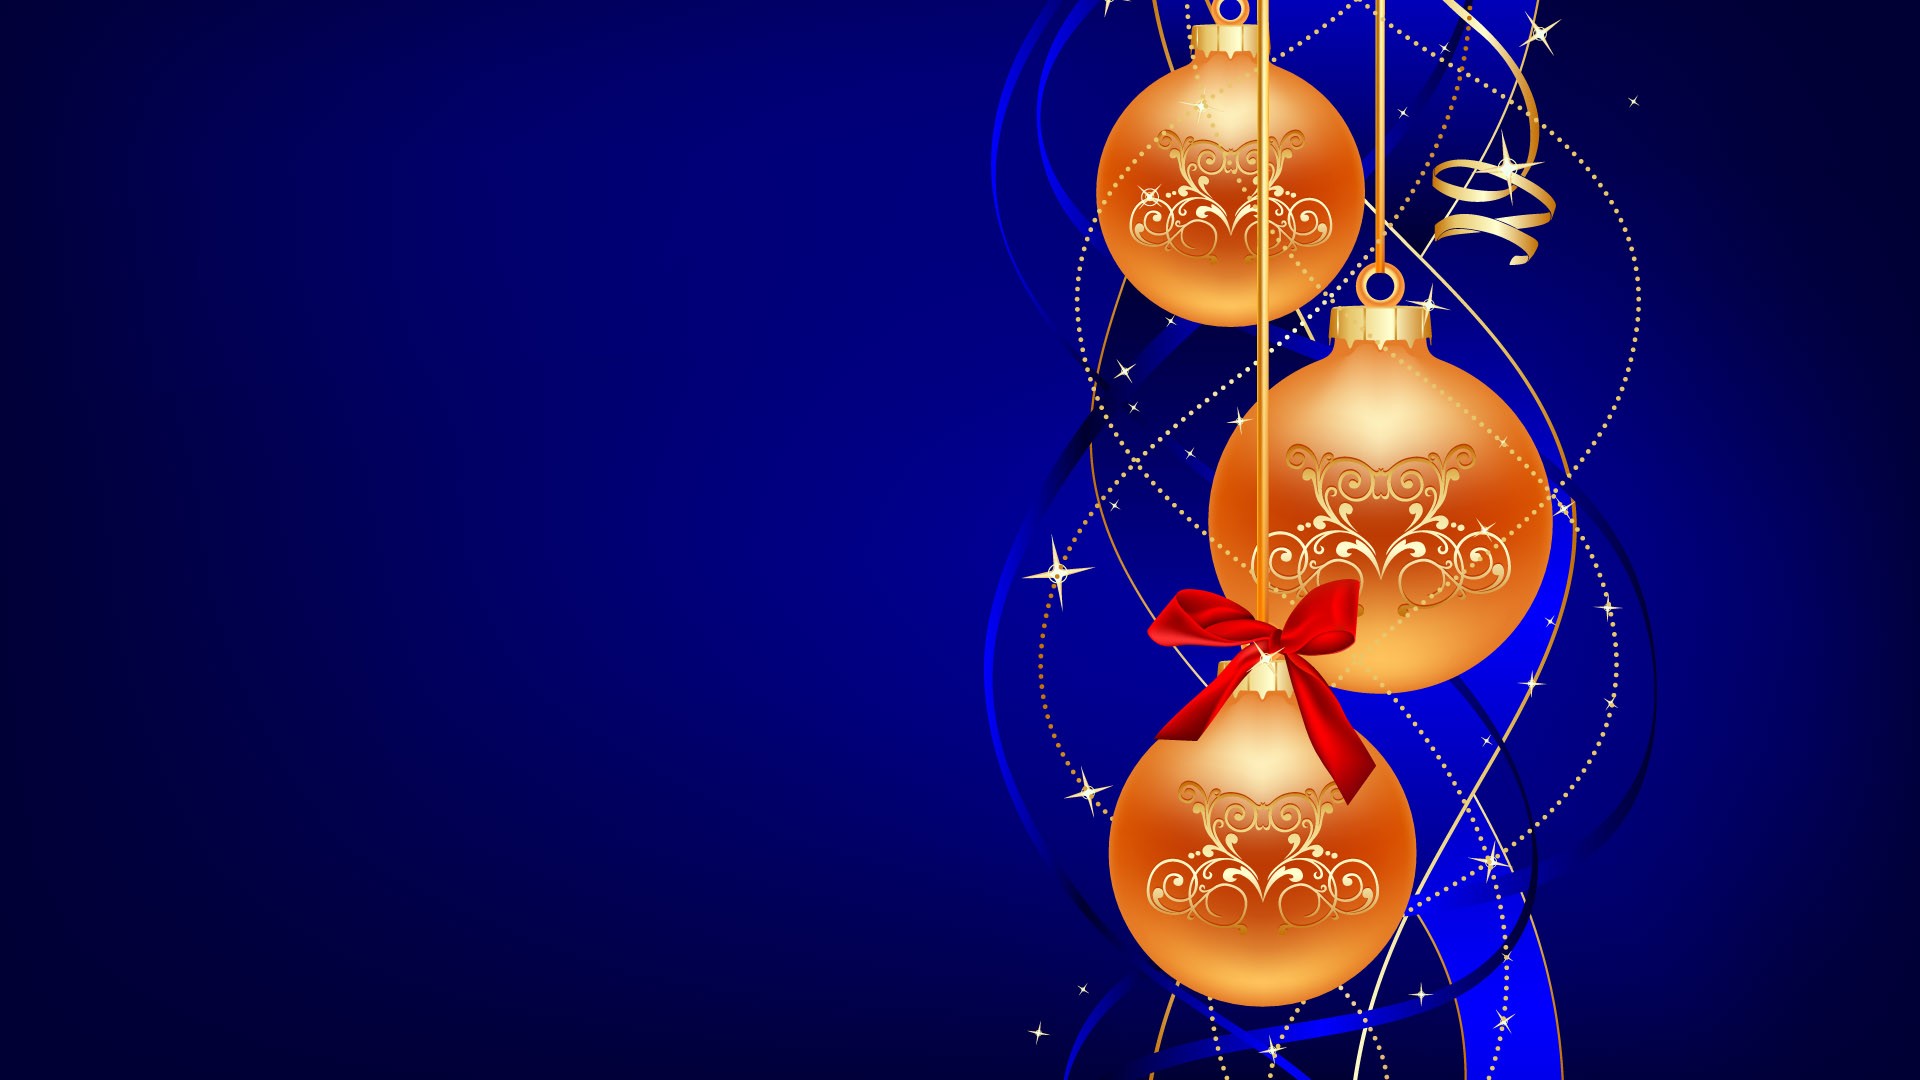 Exquisite Christmas Theme HD Wallpapers #26 - 1920x1080